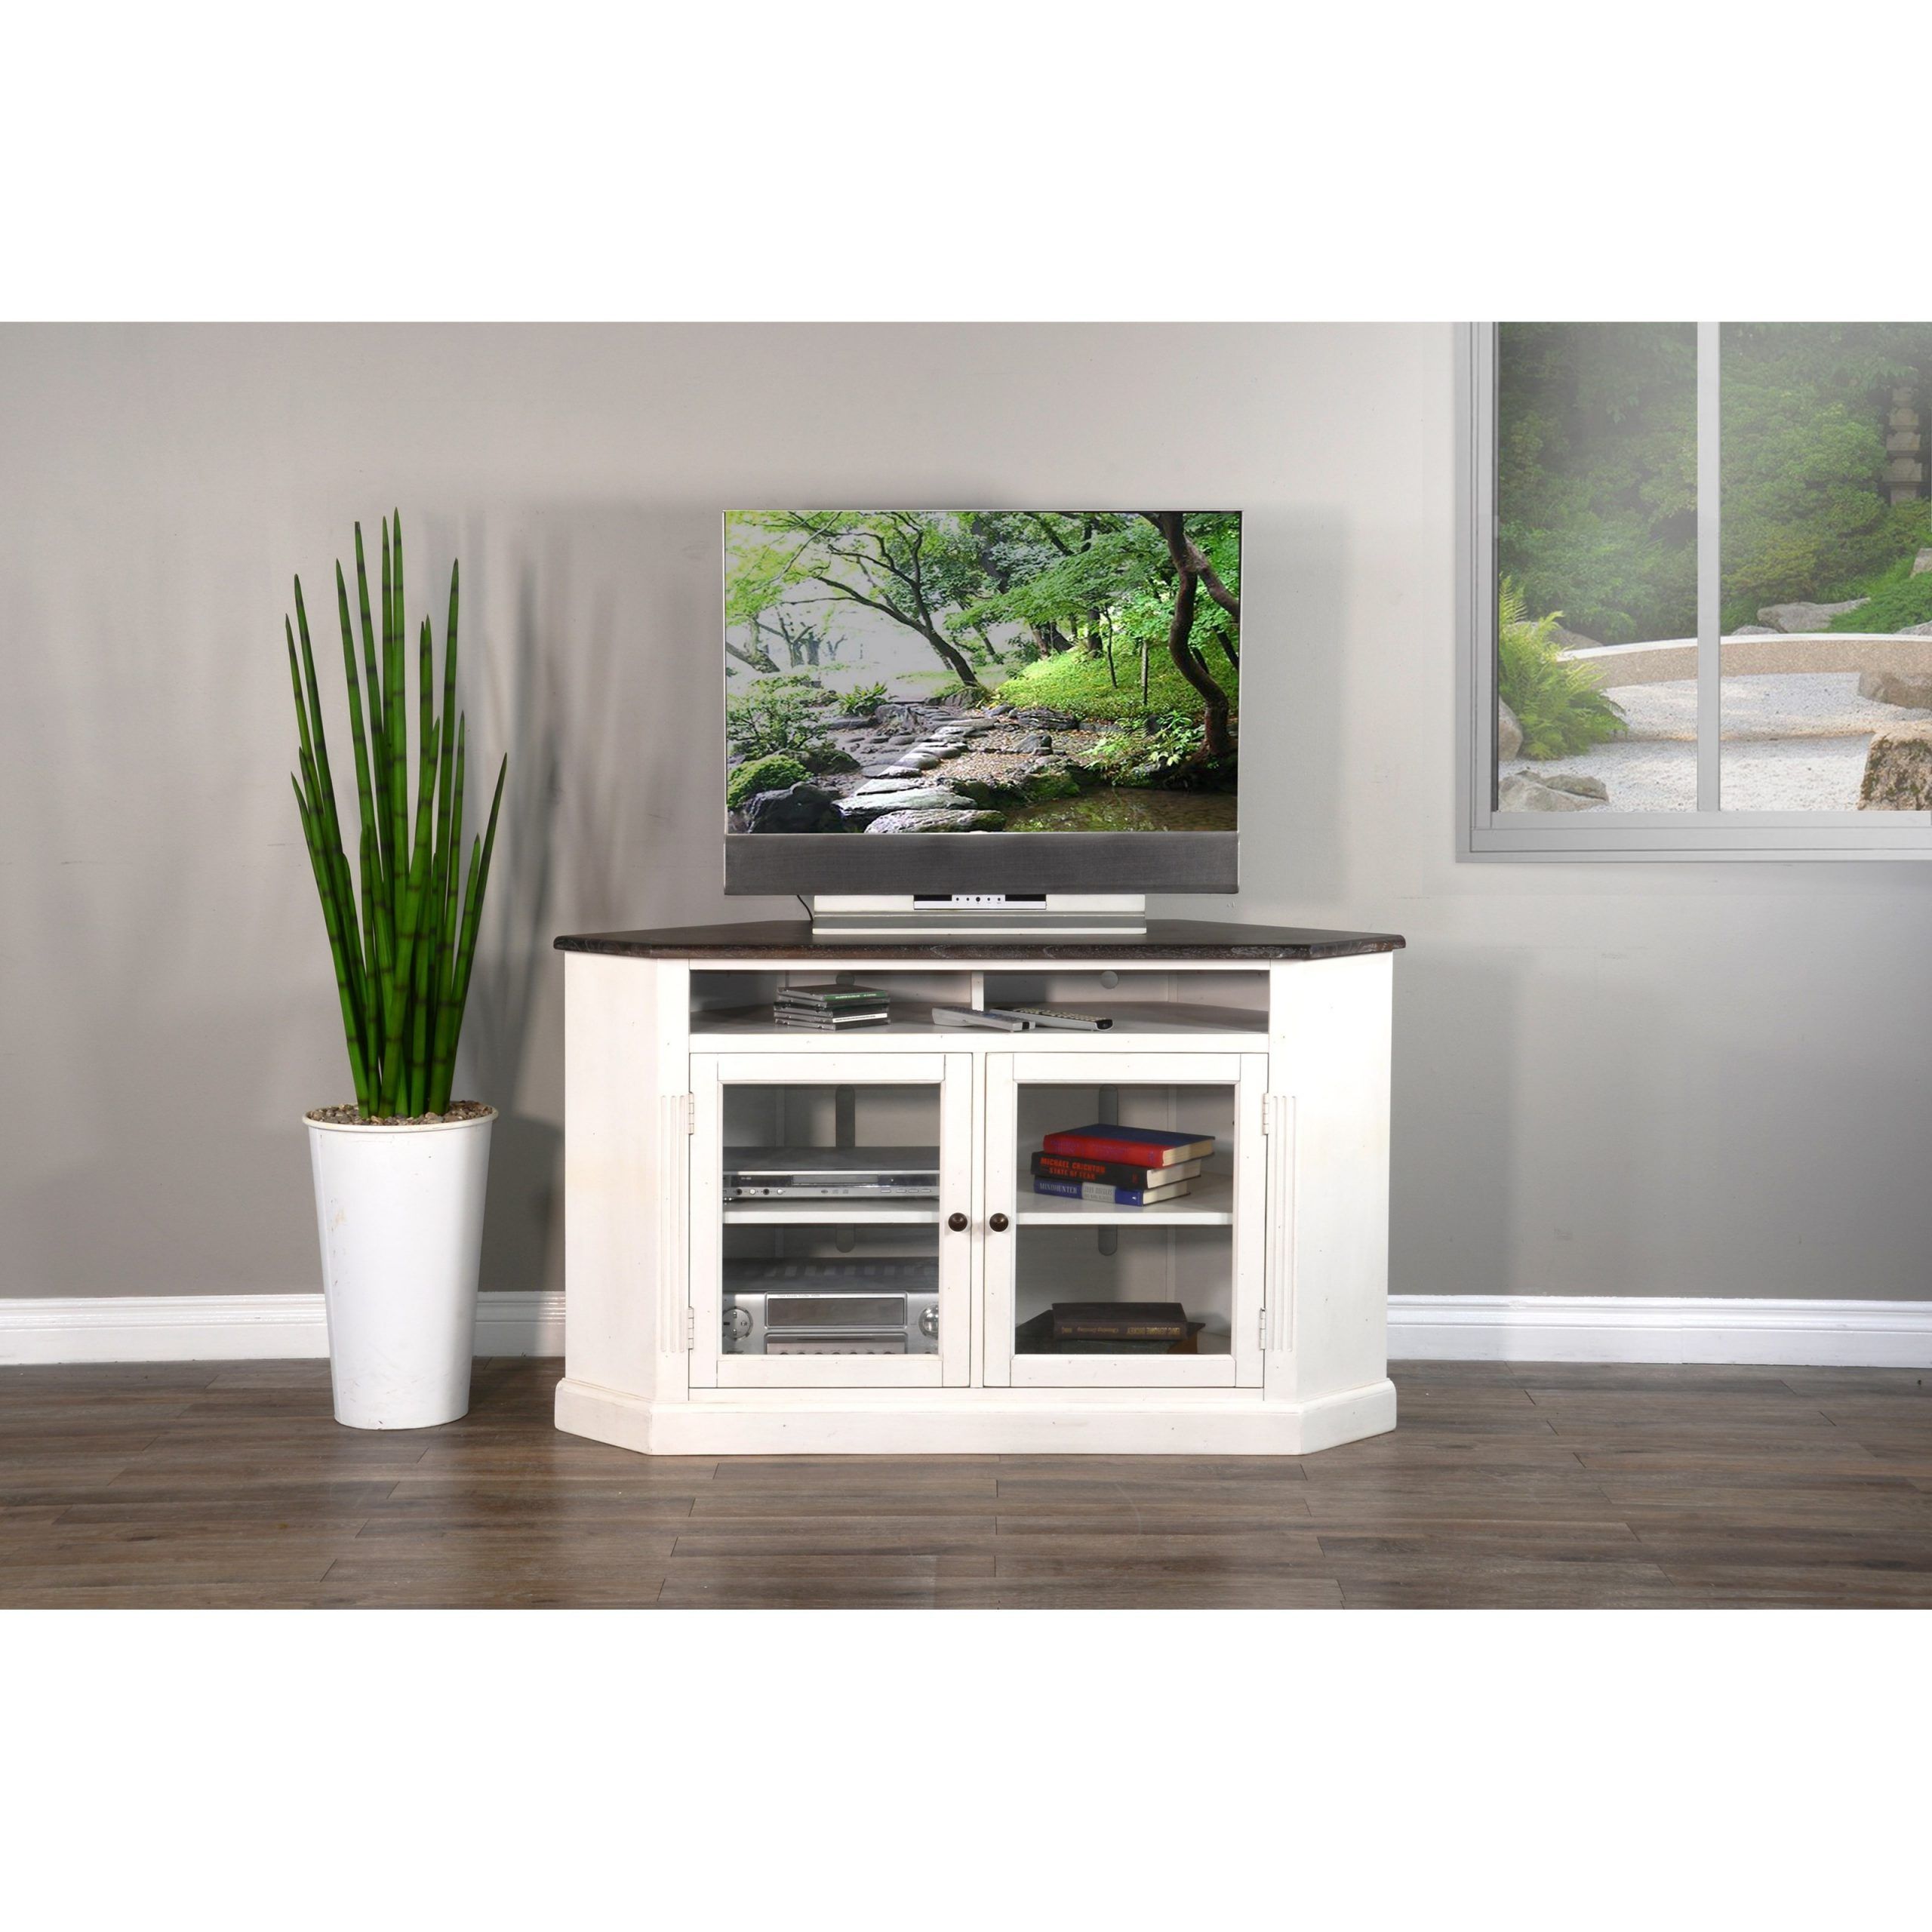 Sunny Designs 3635 Corner Tv Stand With Glass Doors Regarding Modern 2 Glass Door Corner Tv Stands (View 14 of 15)